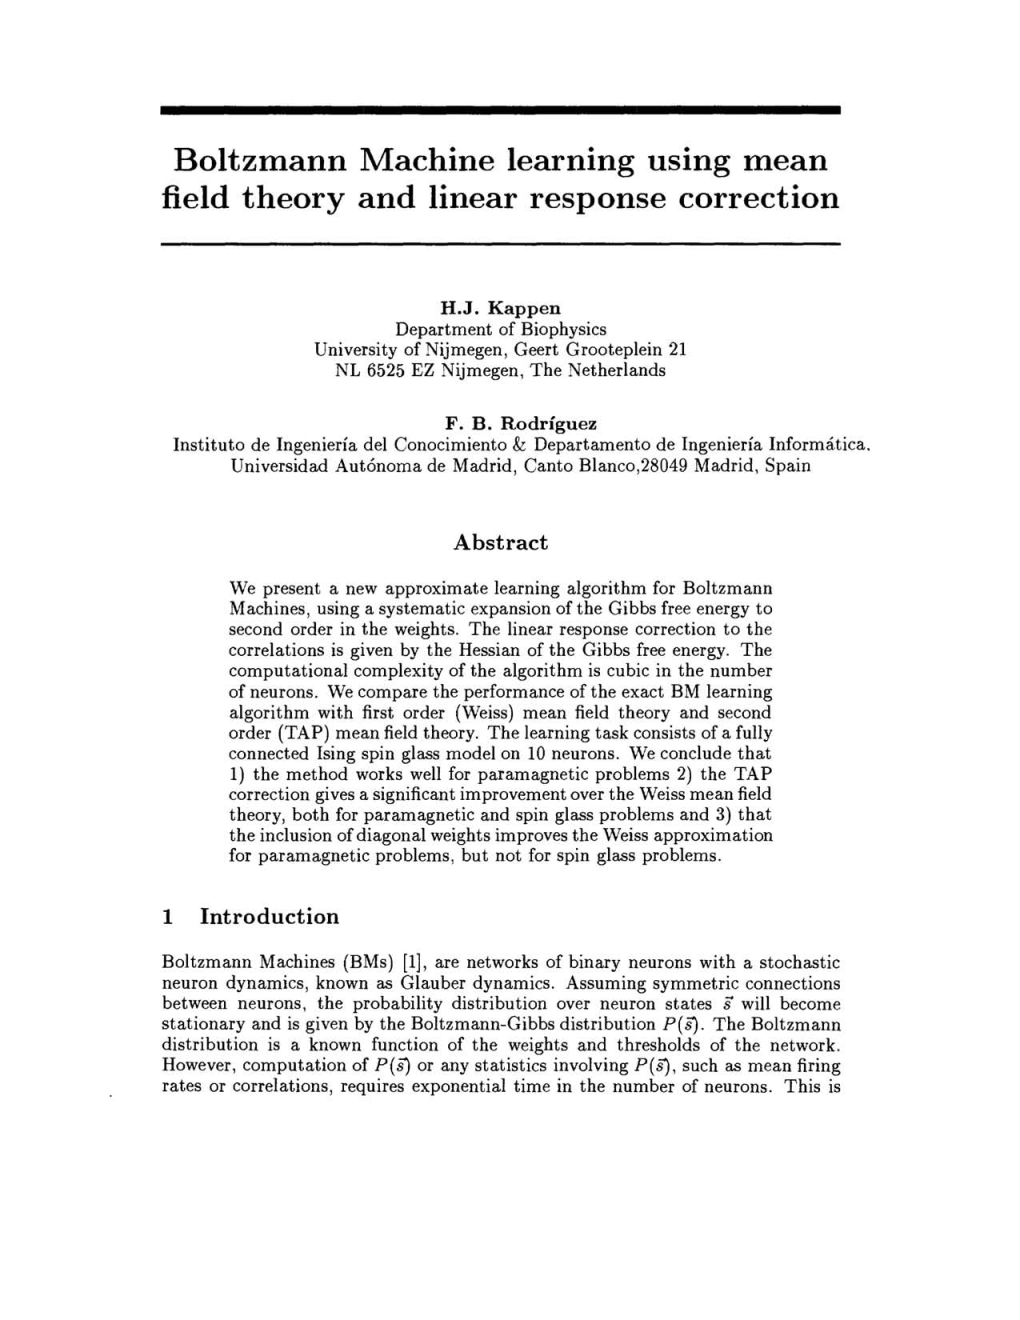 Boltzmann Machine Learning Using Mean Field Theory and Linear Response Correction